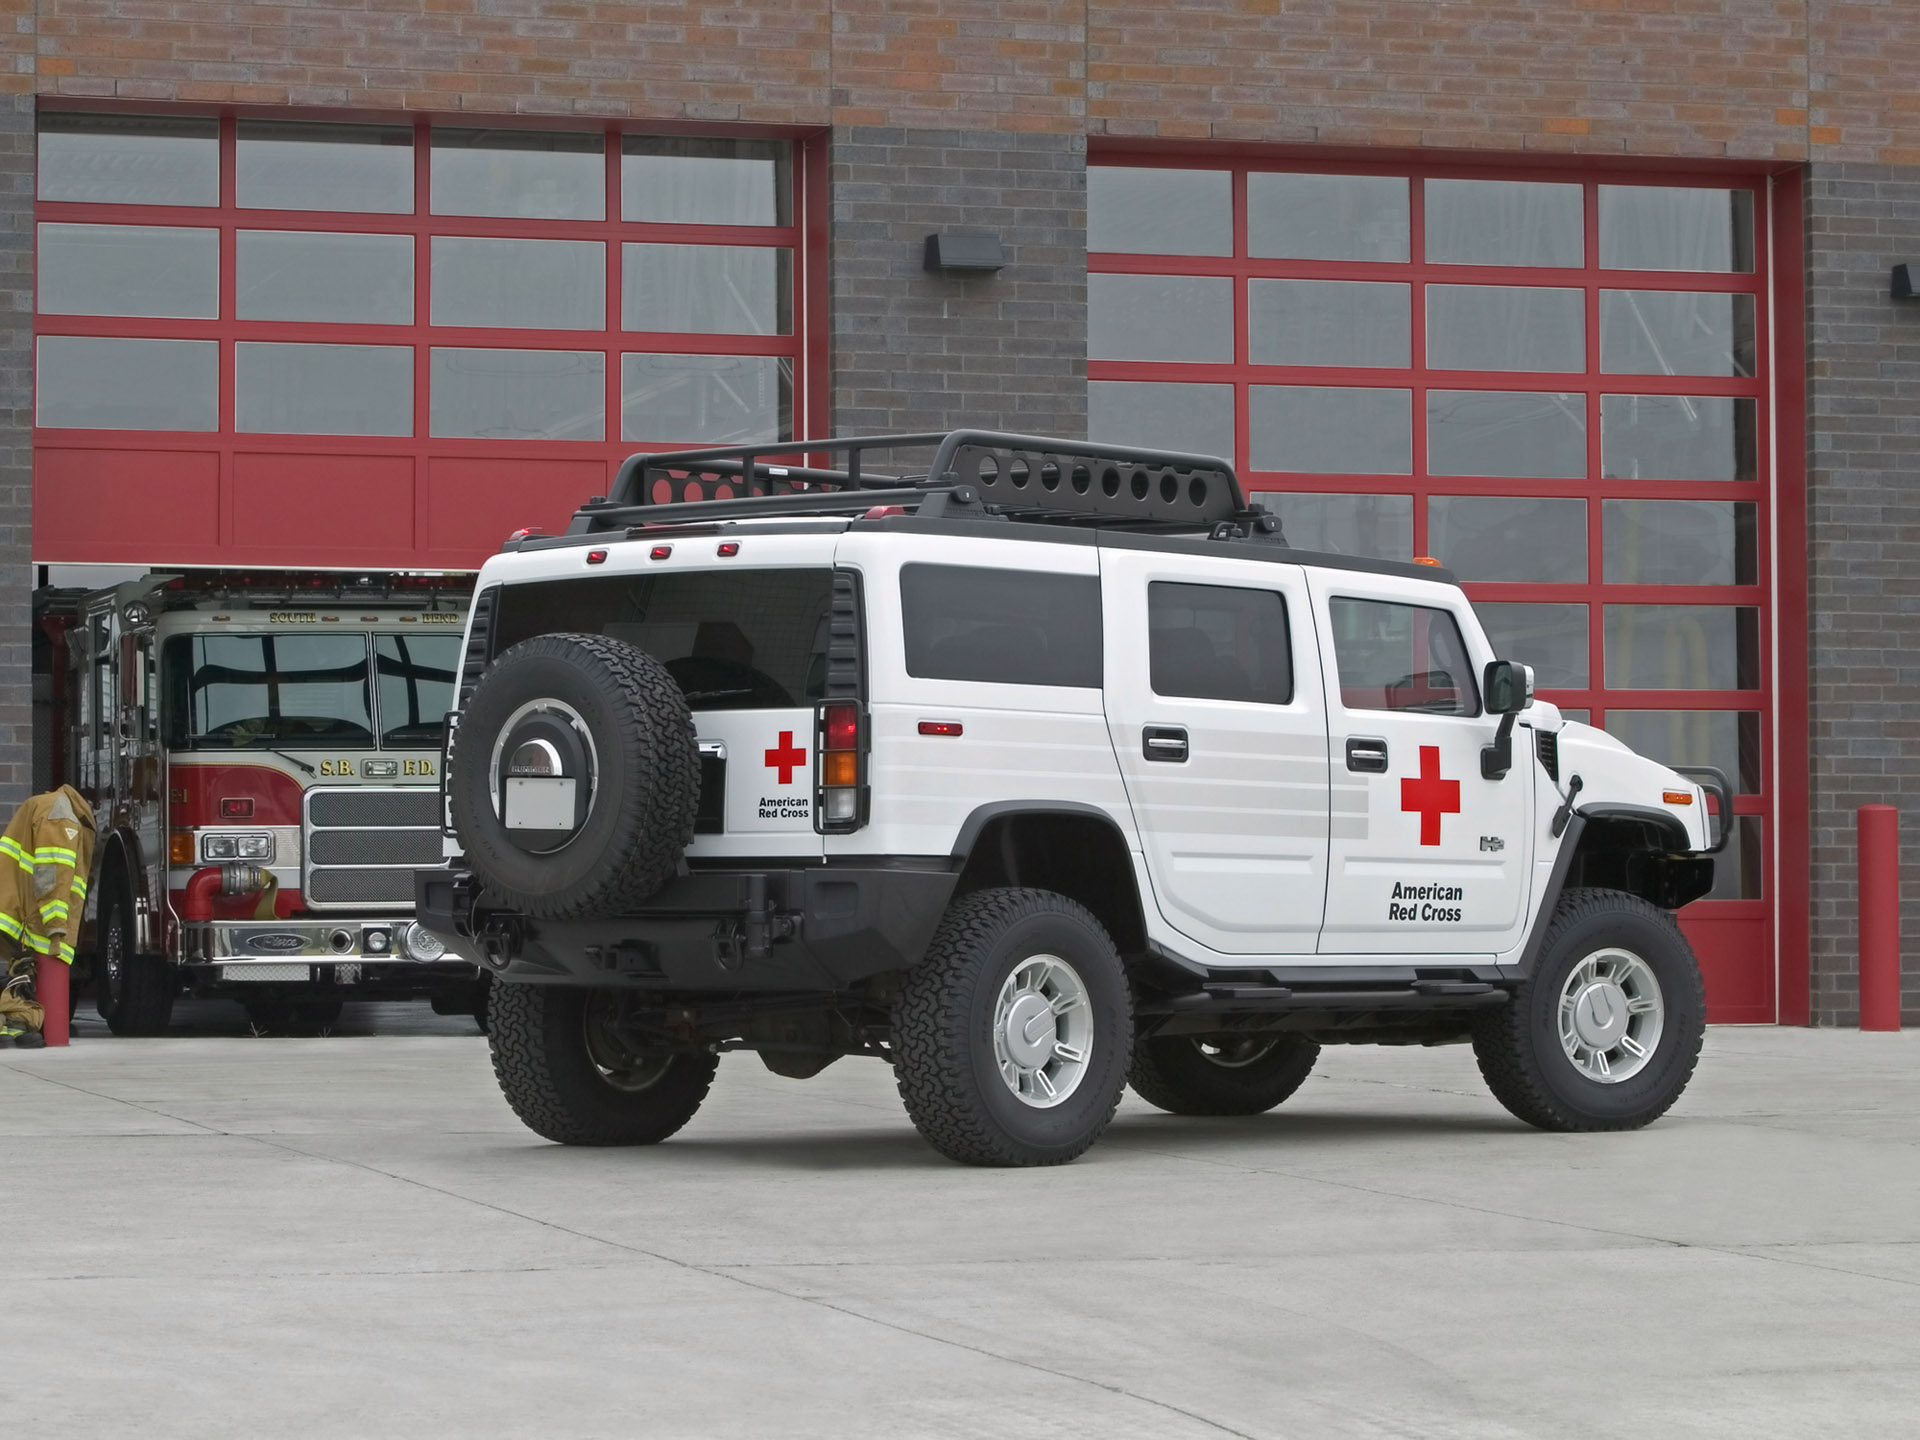 2005 Hummer H2 American Red Cross Emergency Response - American Red Cross Vehicles , HD Wallpaper & Backgrounds